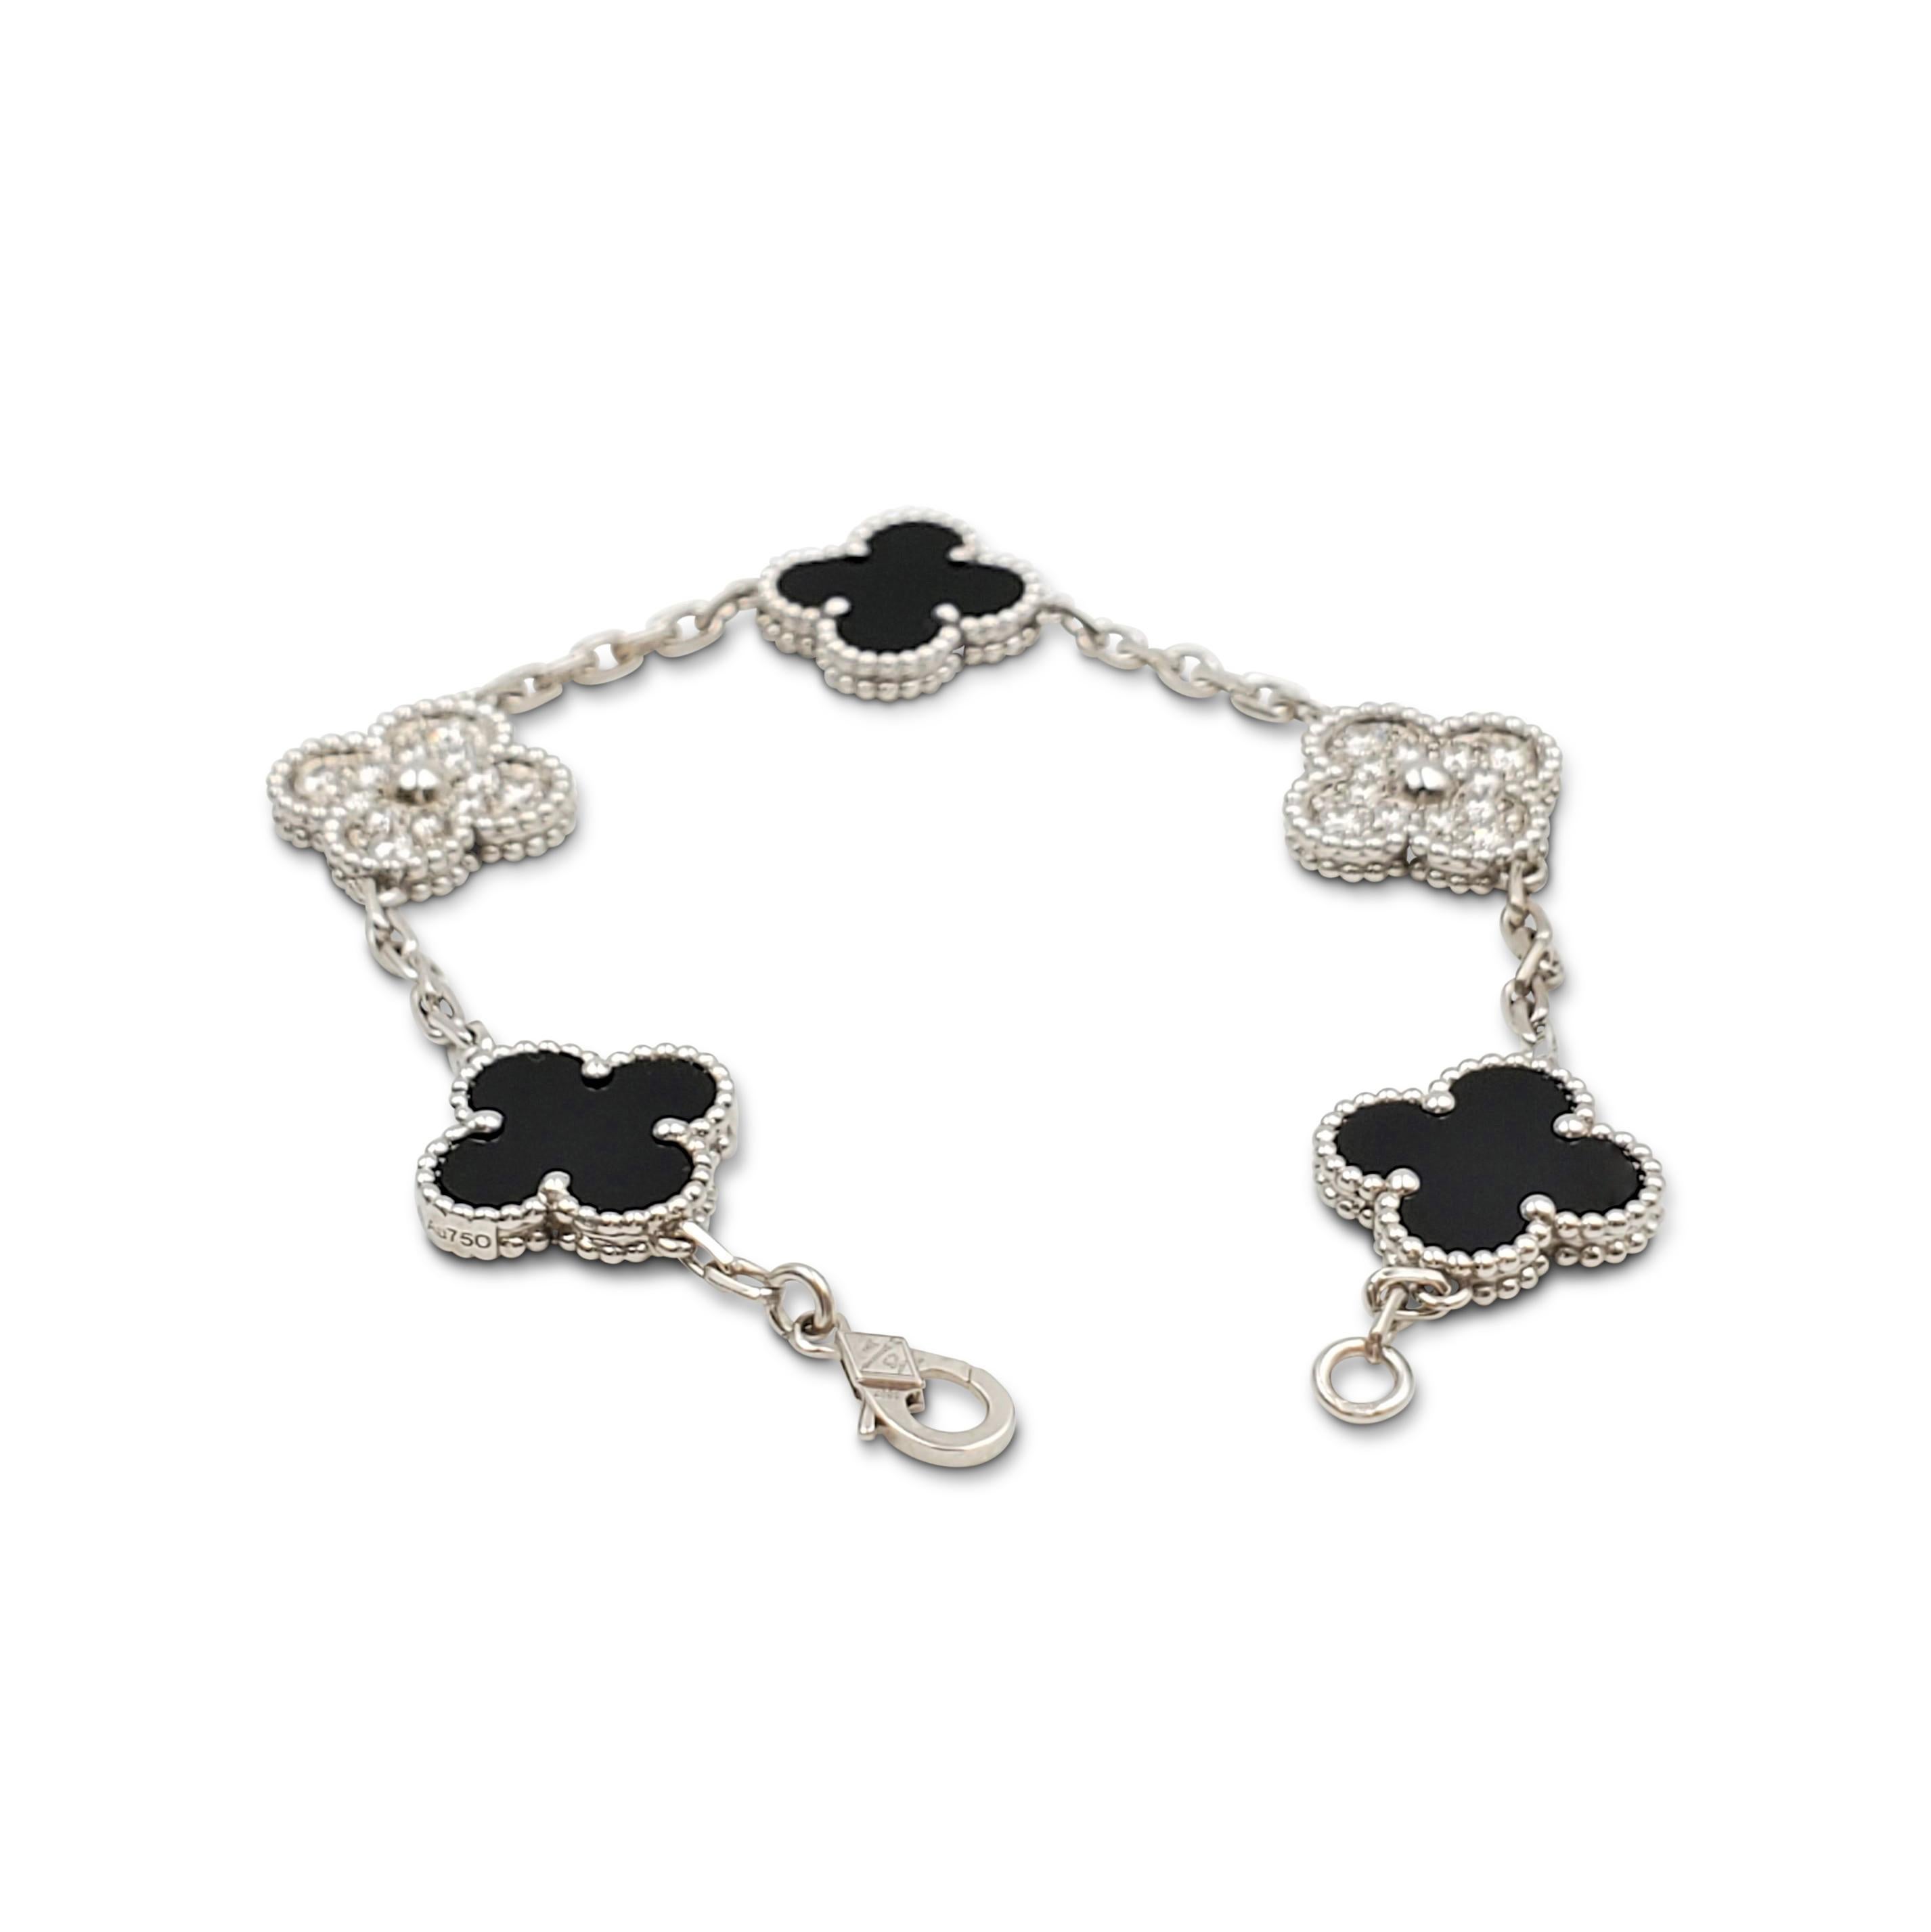 Authentic Van Cleef & Arpels 'Vintage Alhambra' bracelet crafted in 18 karat white gold features alternating clover motifs of onyx and pave diamonds (E-F color, VS clarity) weighing an estimated 0.72 carats total weight. The bracelet measures 6 1/2